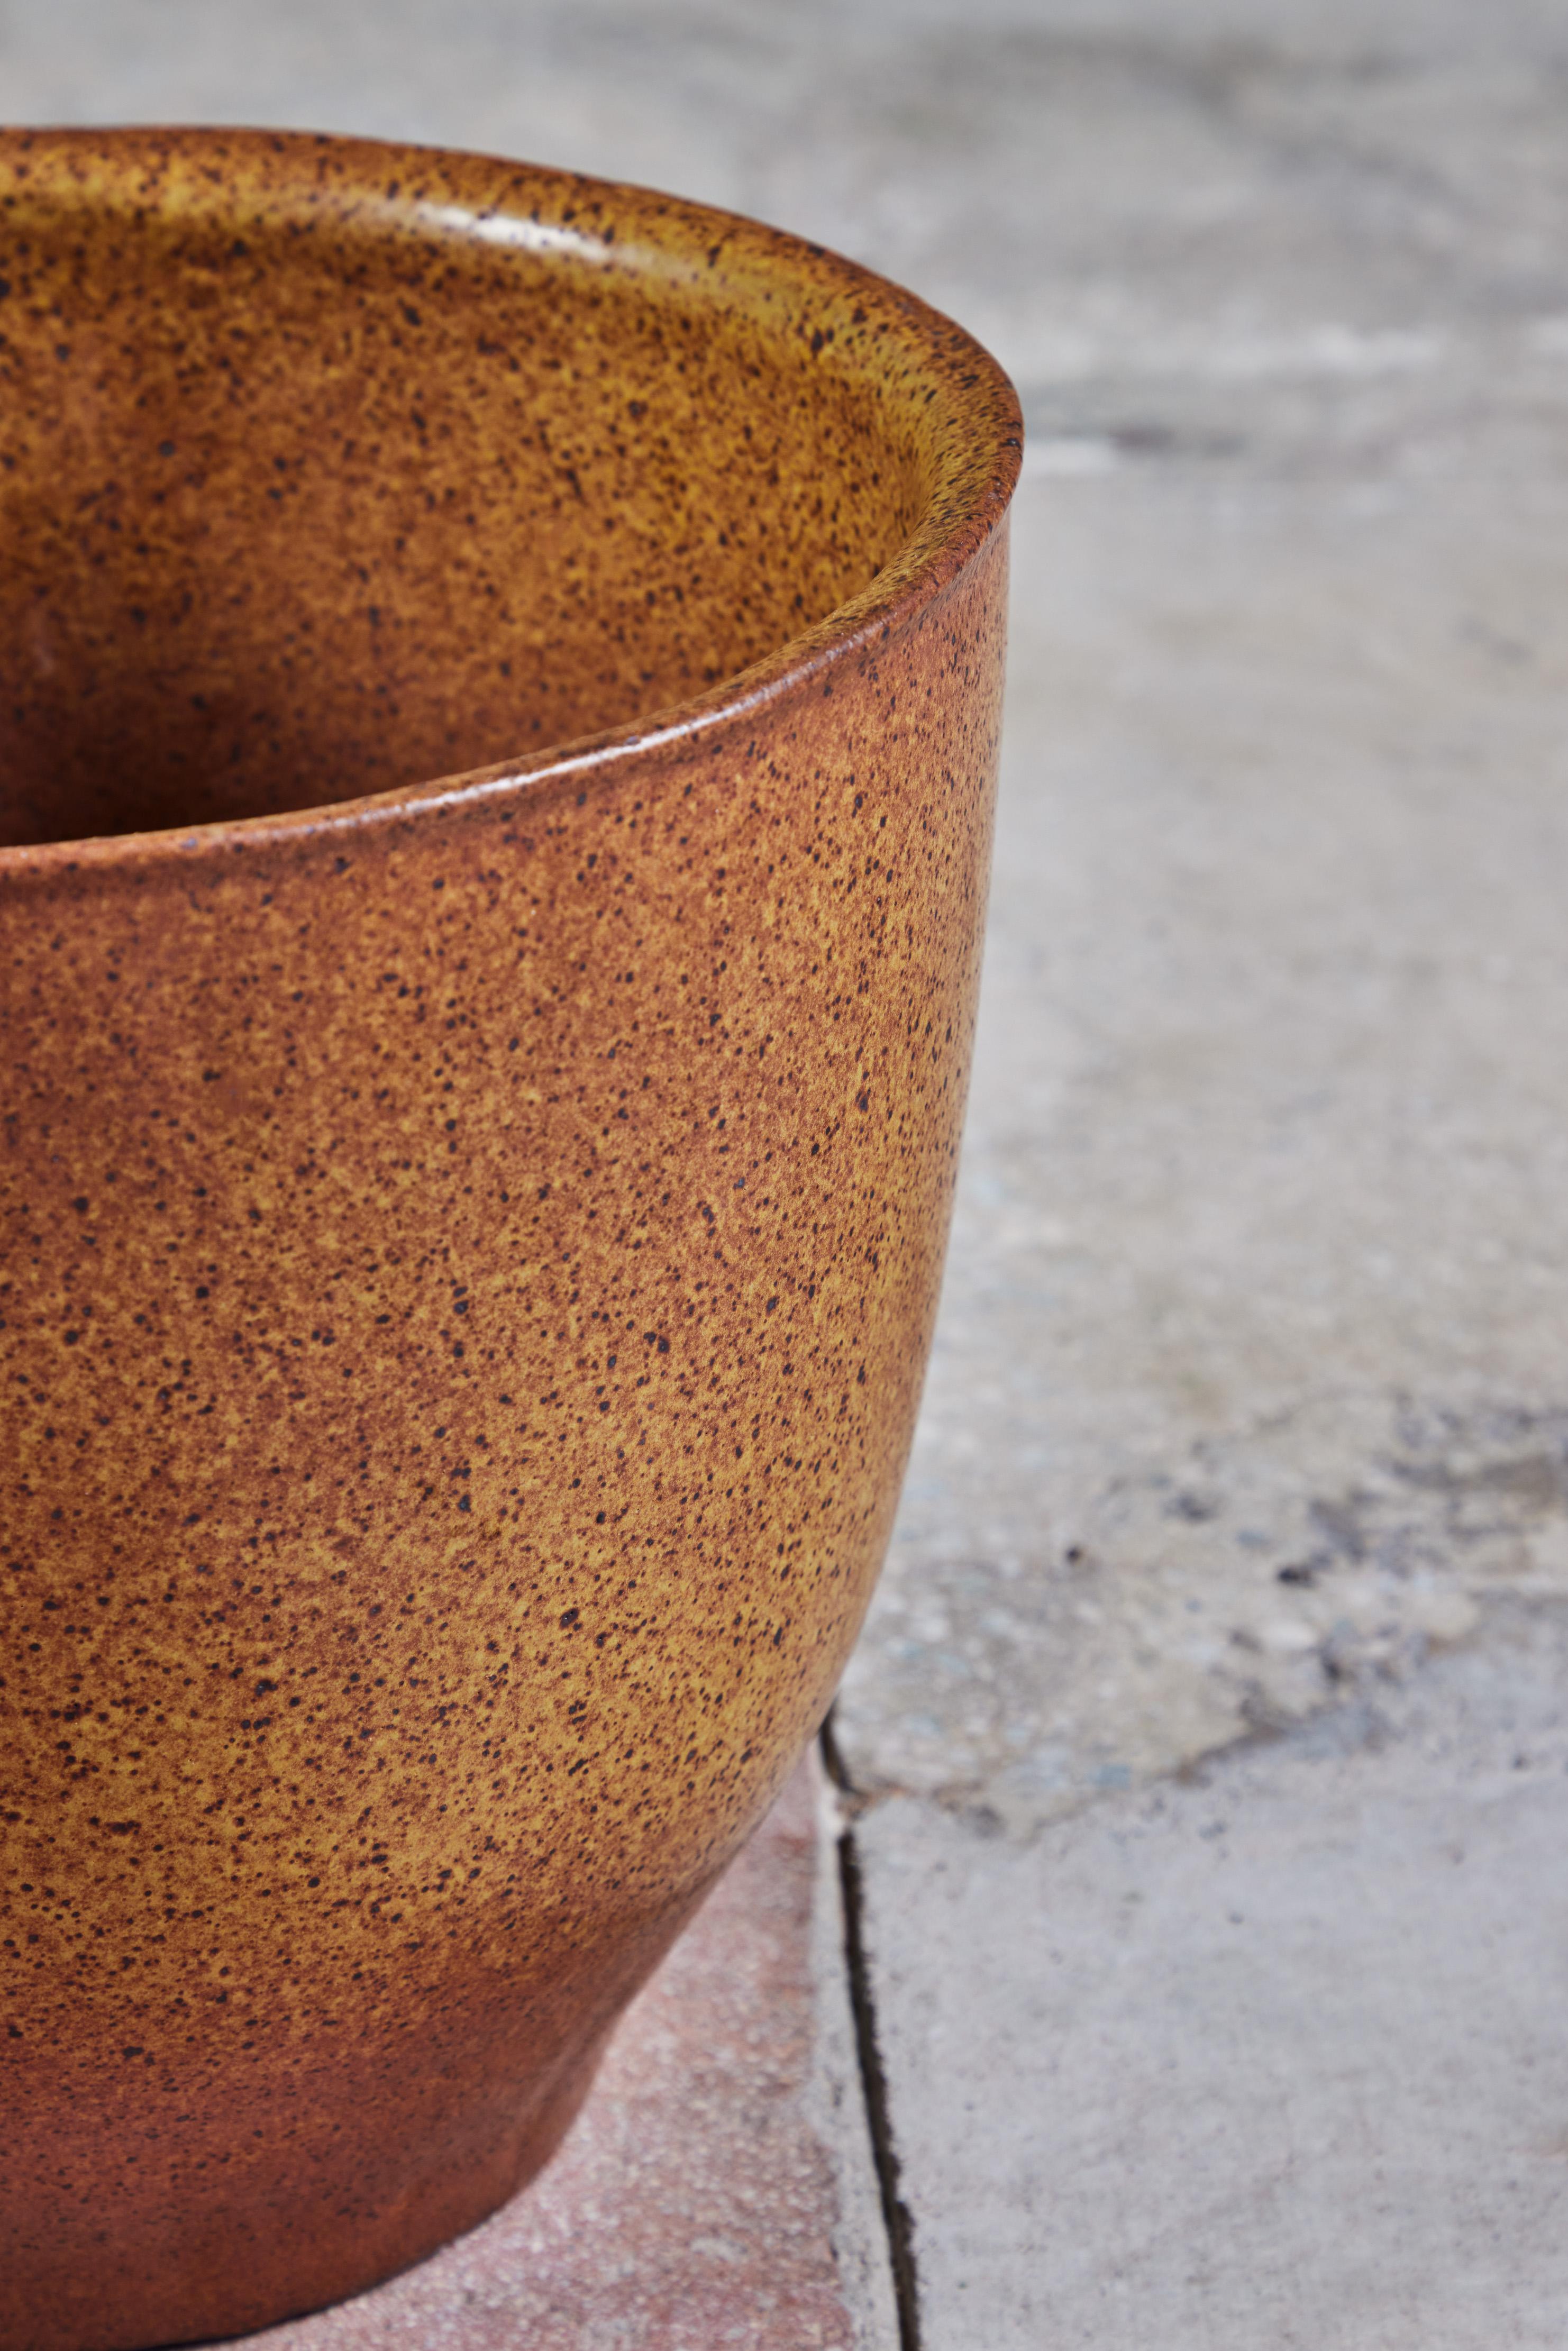 David Cressey Glazed Pro/Artisan Planter for Architectural Pottery In Excellent Condition For Sale In Los Angeles, CA